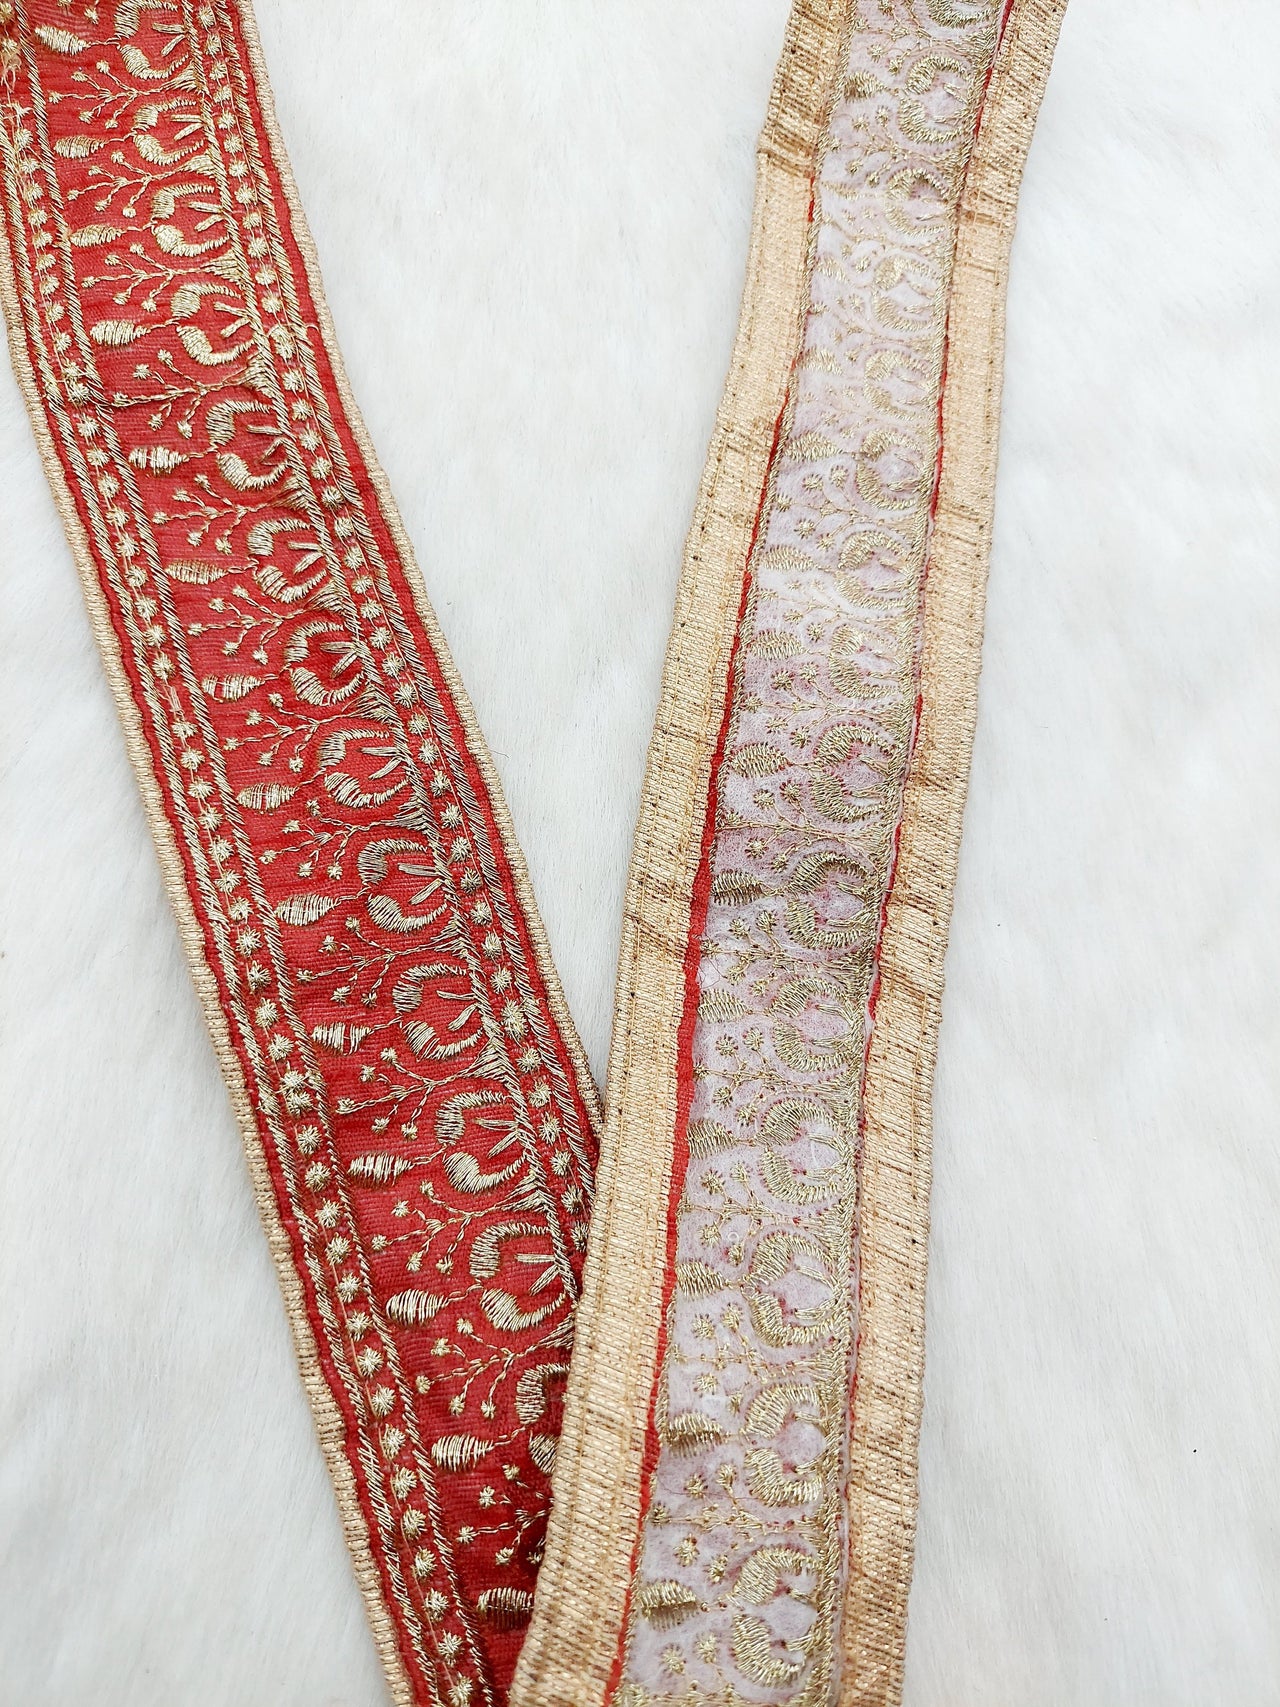 Red Art Silk Trim In Gold Floral Embroidery, Embroidered Flowers Border, Approx. 50mm wide, Decorative Trim, Trim by Yard |9 Yards